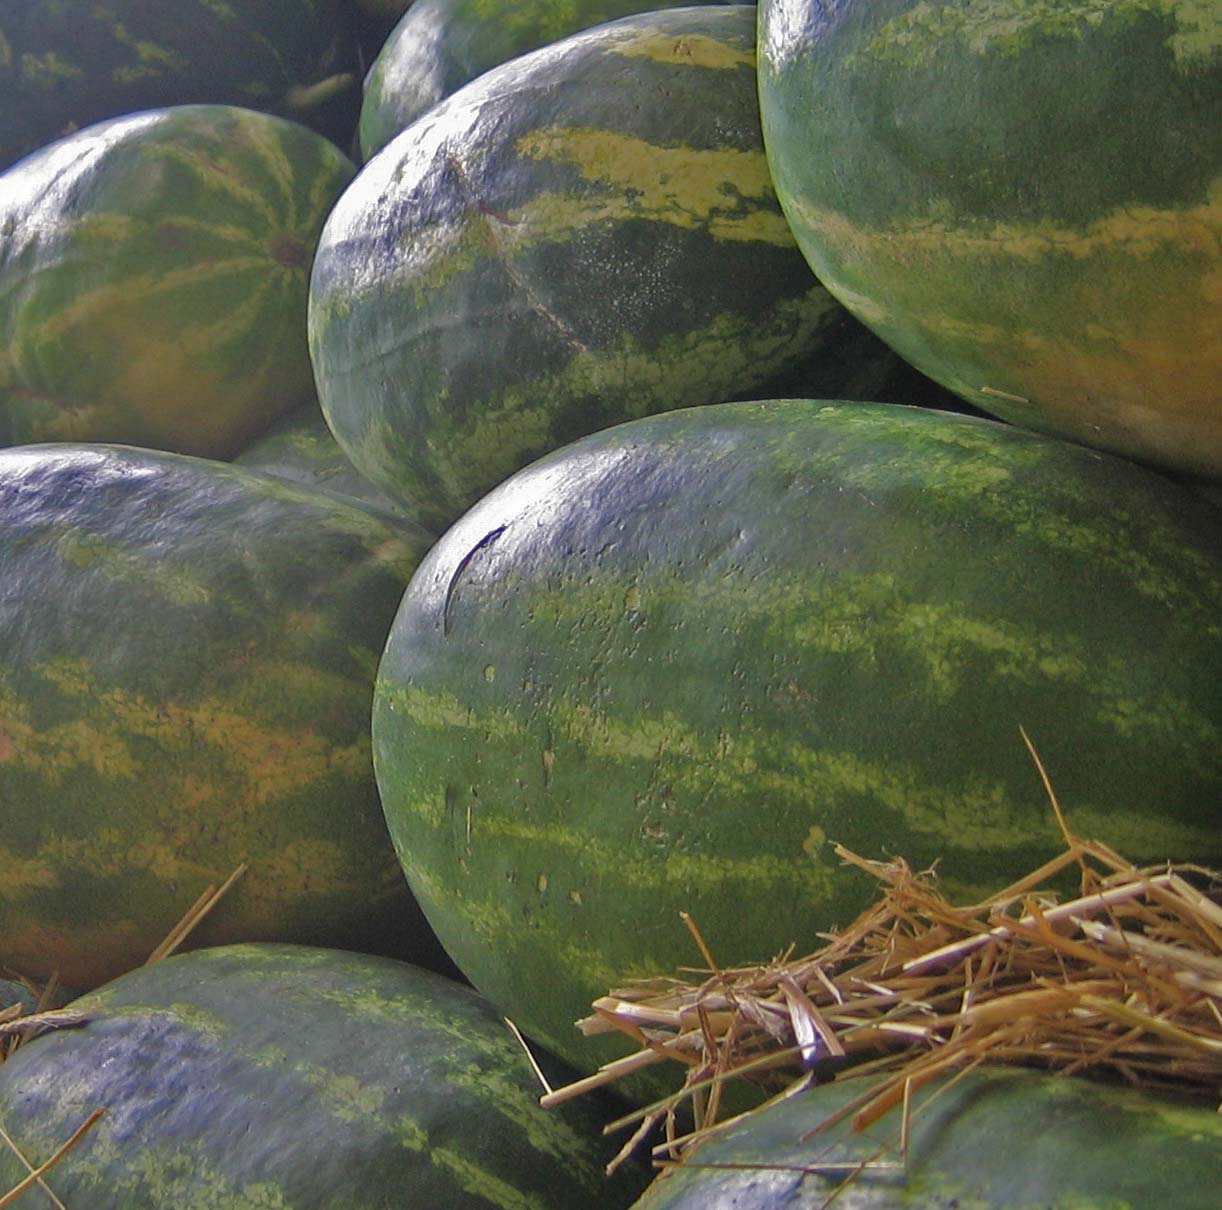 Georgia watermelons harvested for delivery.